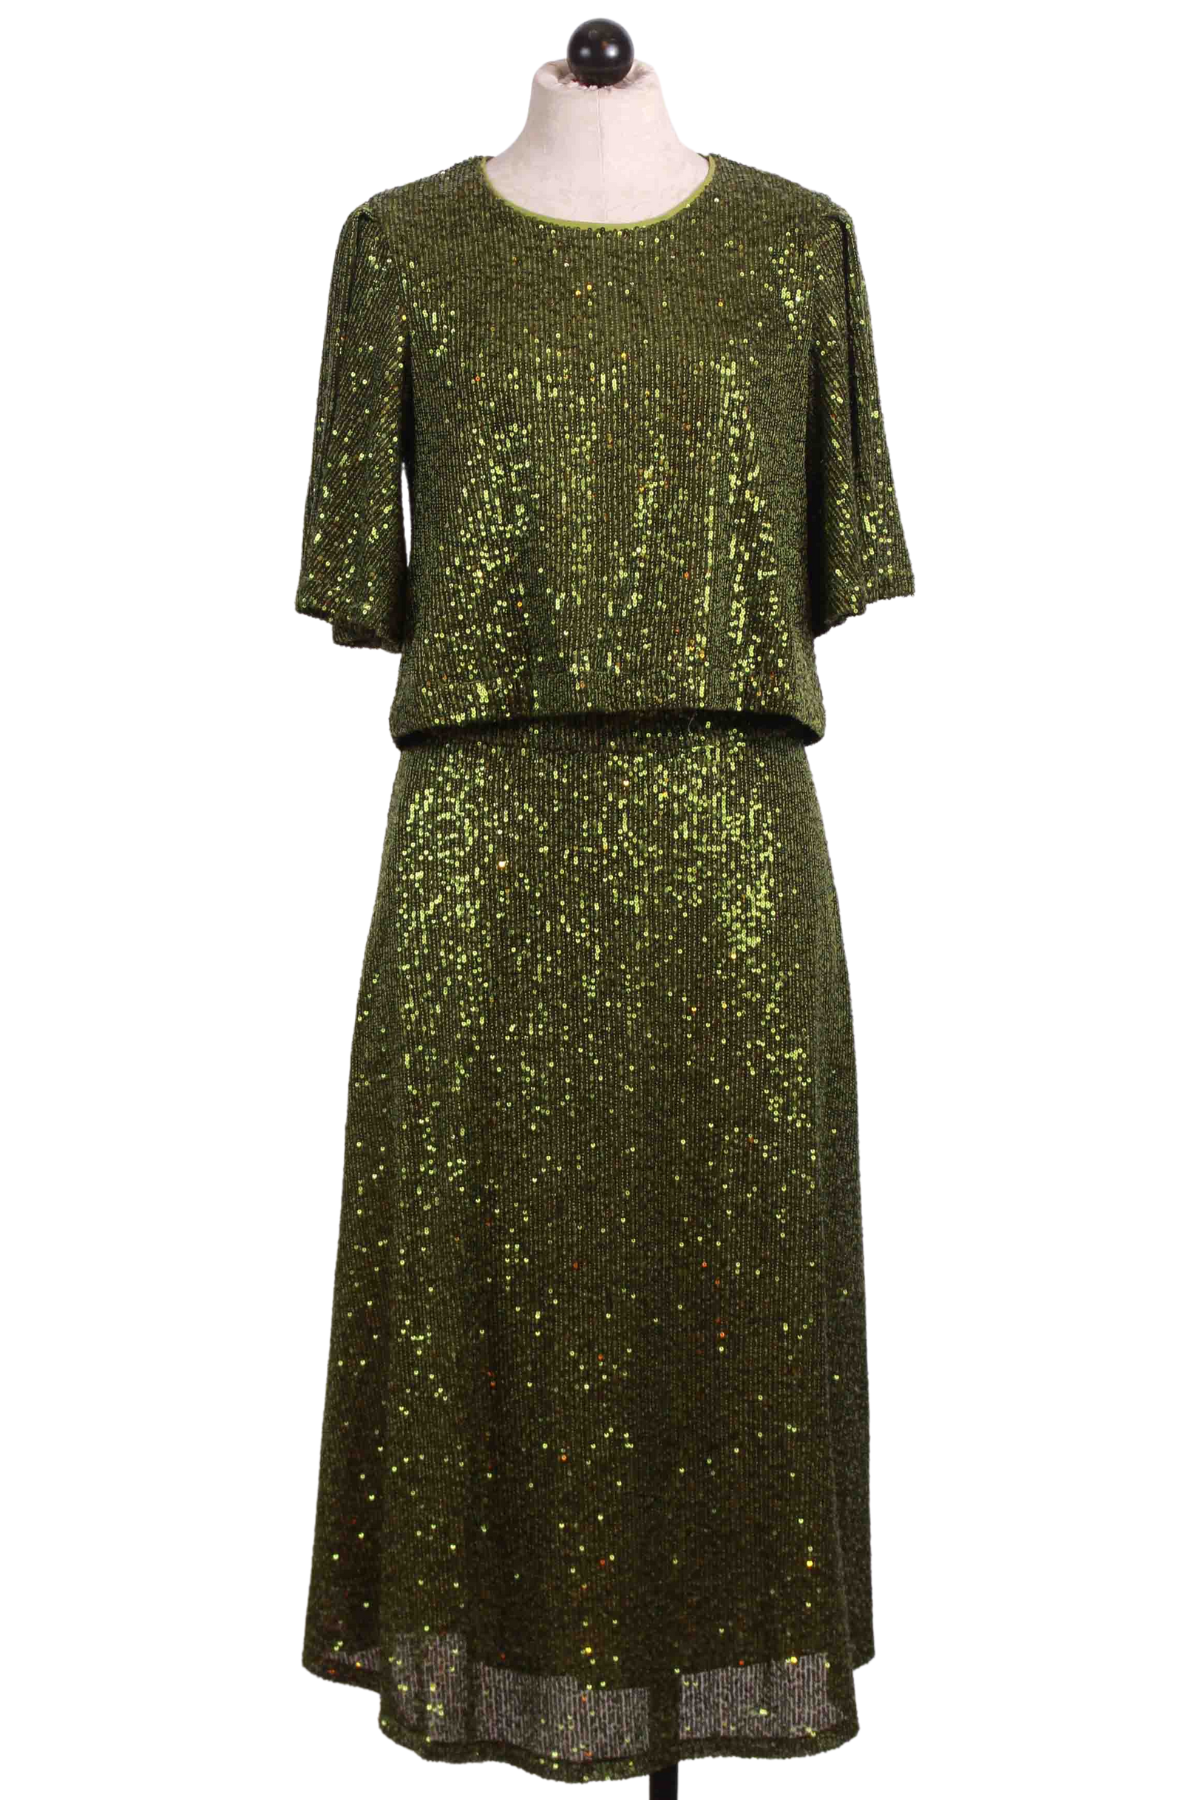 Green Sparkle Sequined Edge of Silence Skirt by Traffic People  paired with the matching top